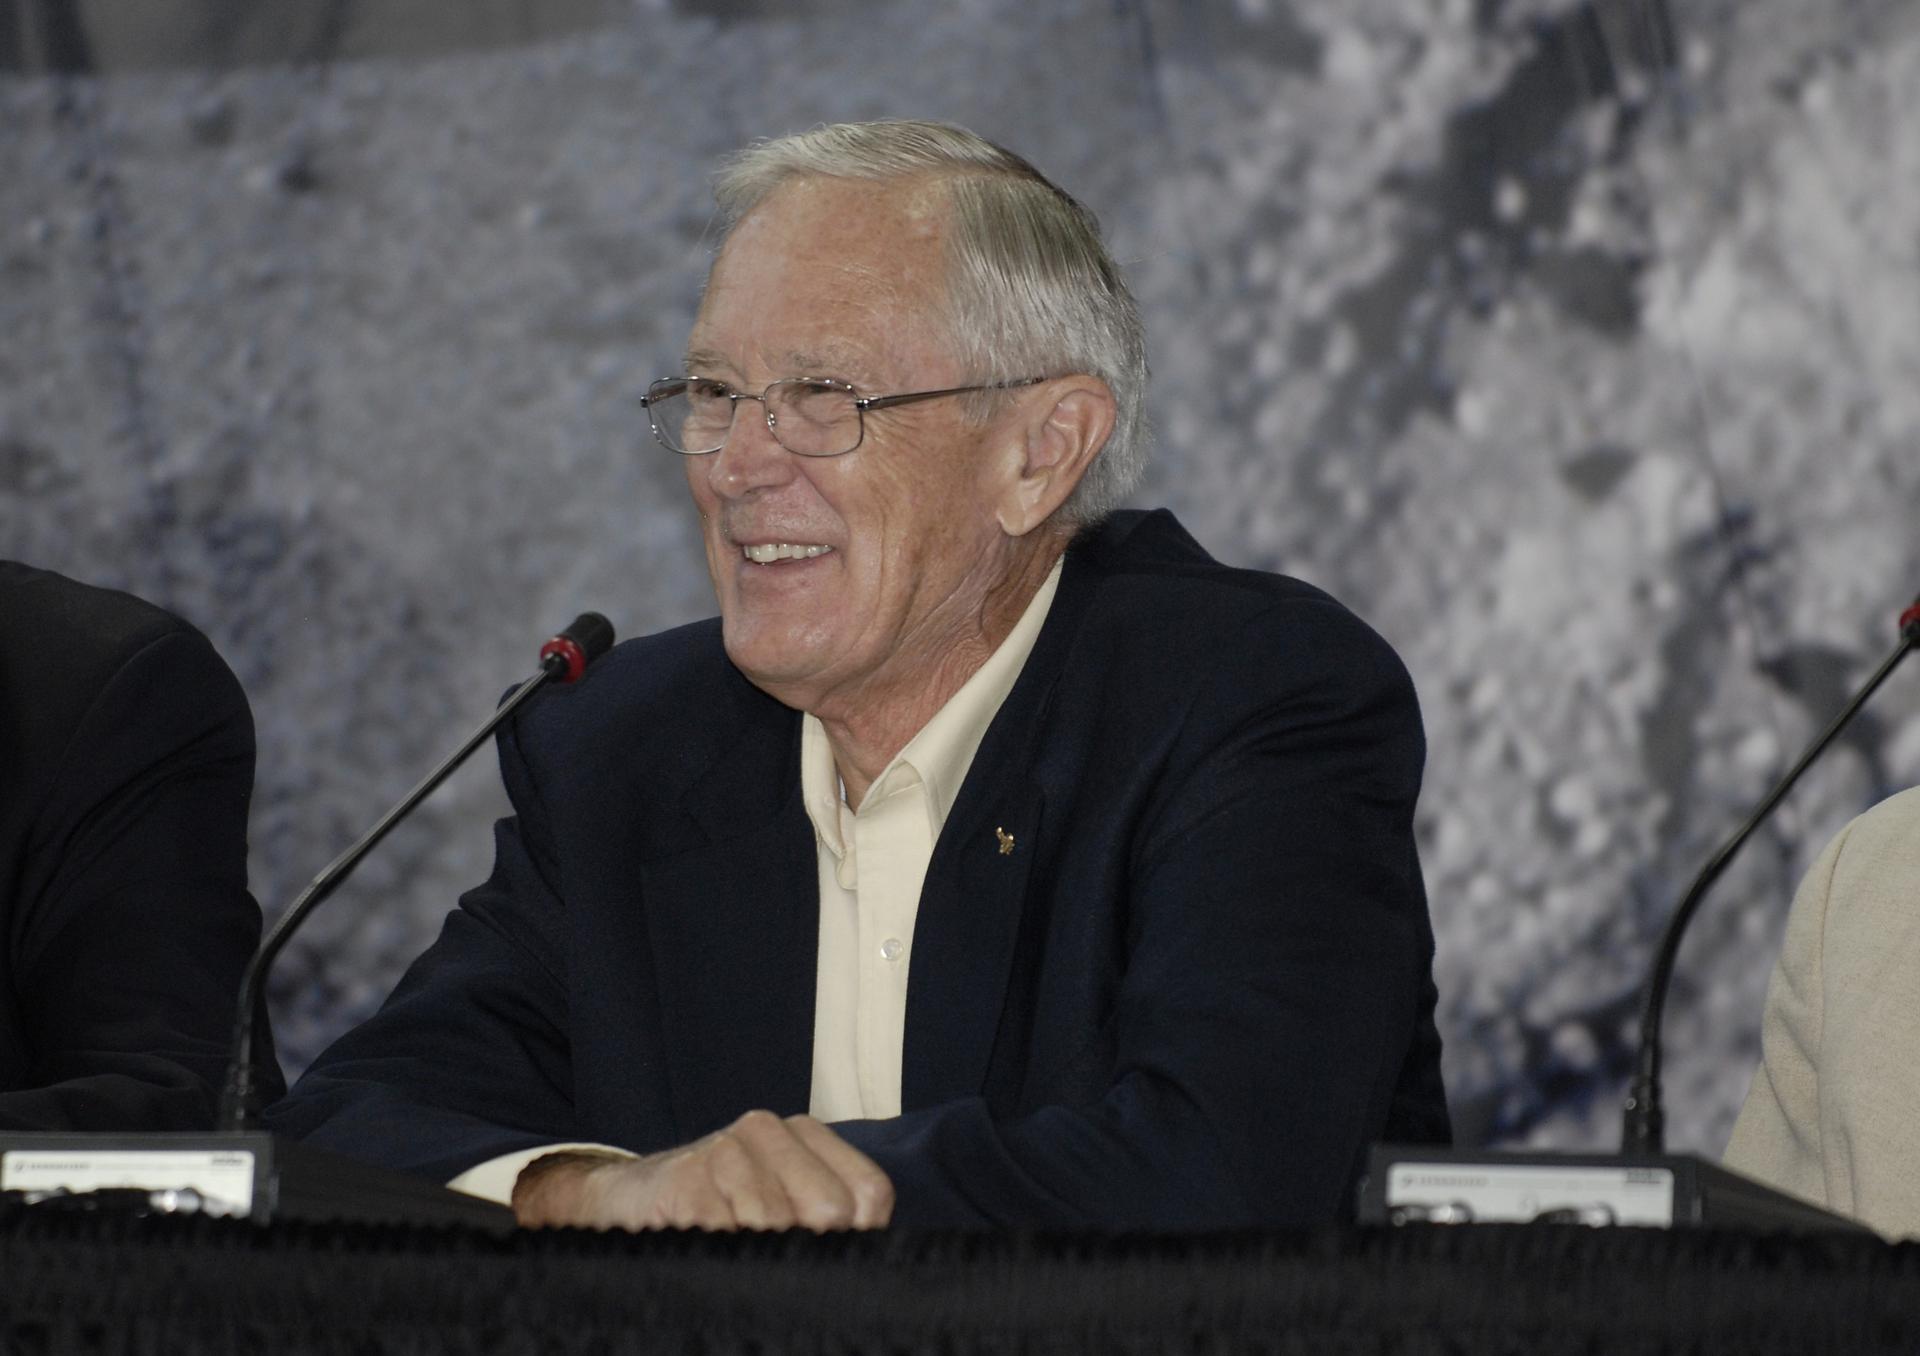 Charlie Duke at an event celebrating the 40th anniversary of Apollo